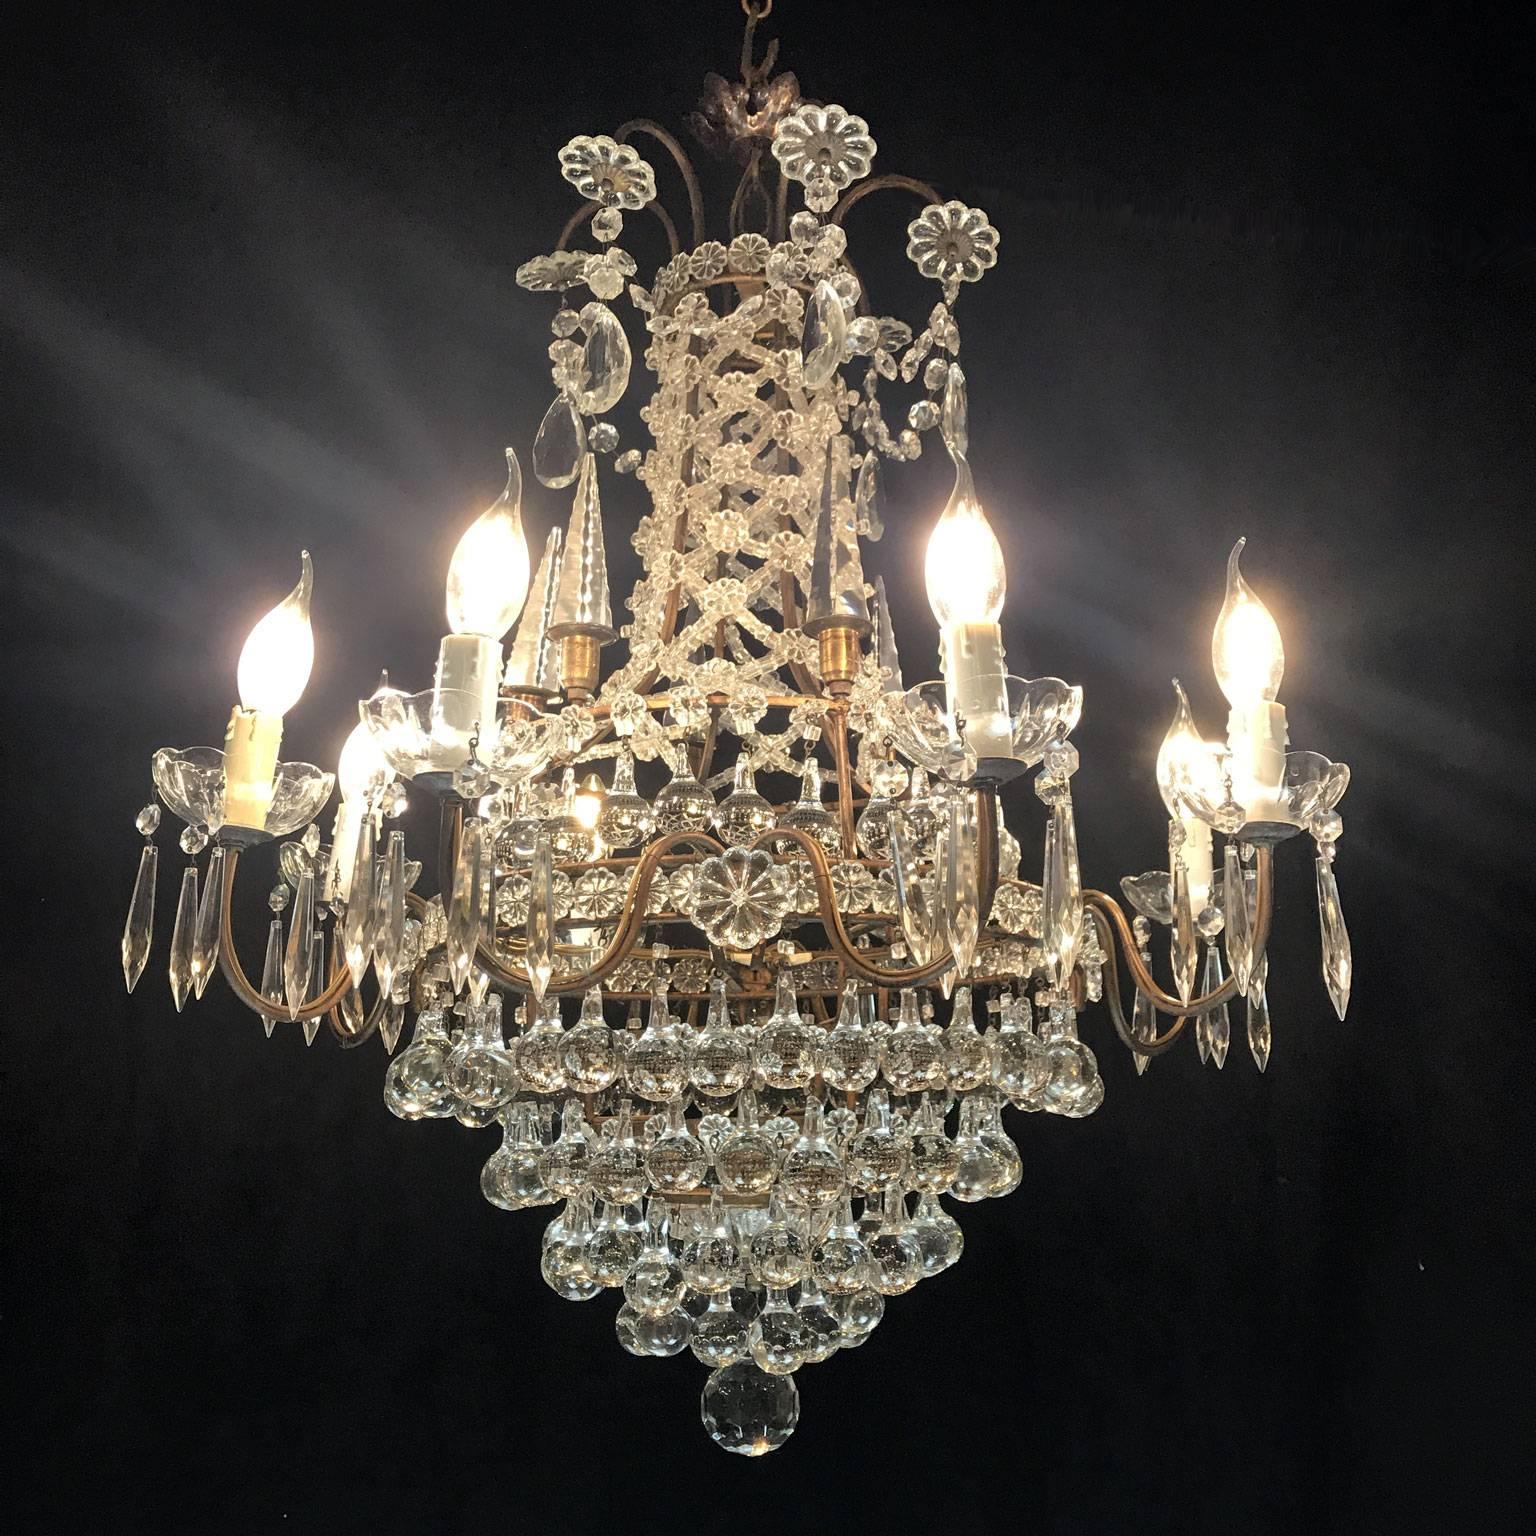 An original six-light crystal chandelier, circular bronze structure, in good condition, with working wiring. Italian origin, it comes from a Milanese private palazzo.

The circular bronze structure in the lower part consists of five circular rings,